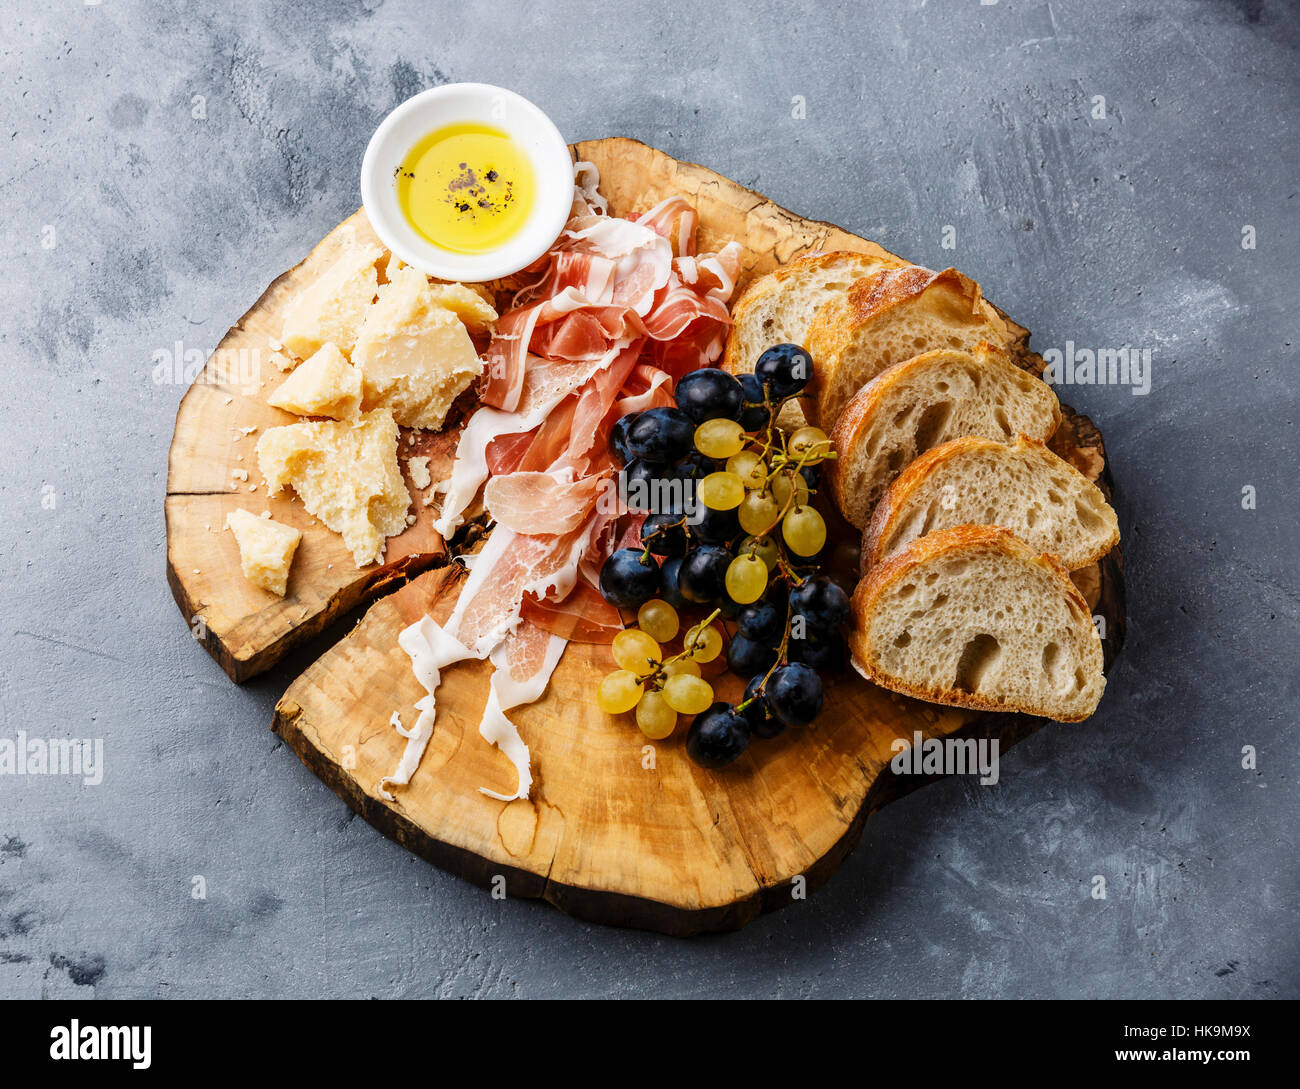 Appetizer plate with prosciutto, parmesan cheese and bread on wooden board on gray concrete background Stock Photo